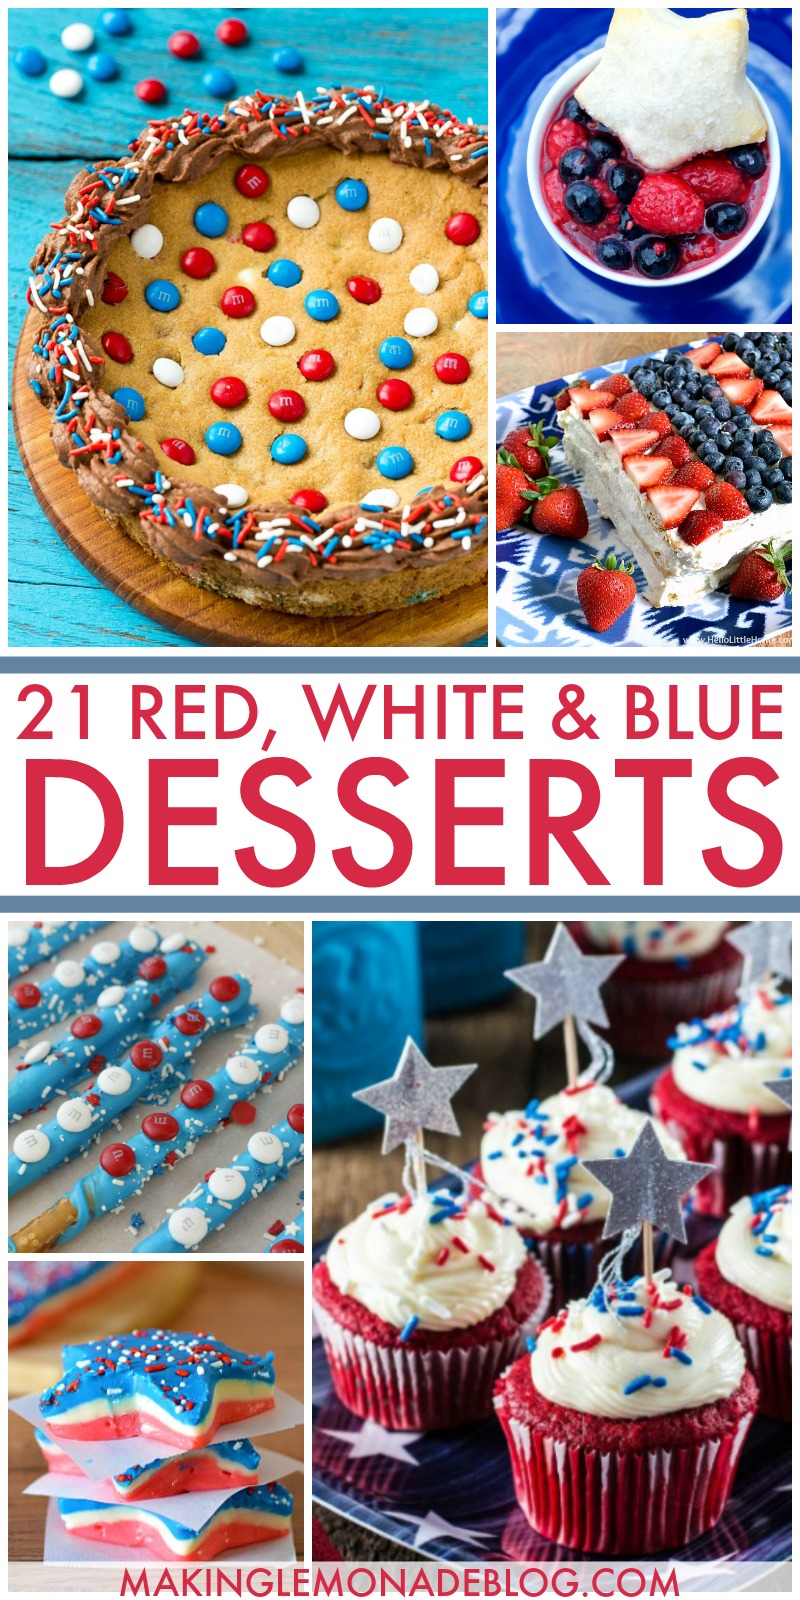 21 Red, White and Blue Dessert Ideas for Memorial Day and the 4th of July